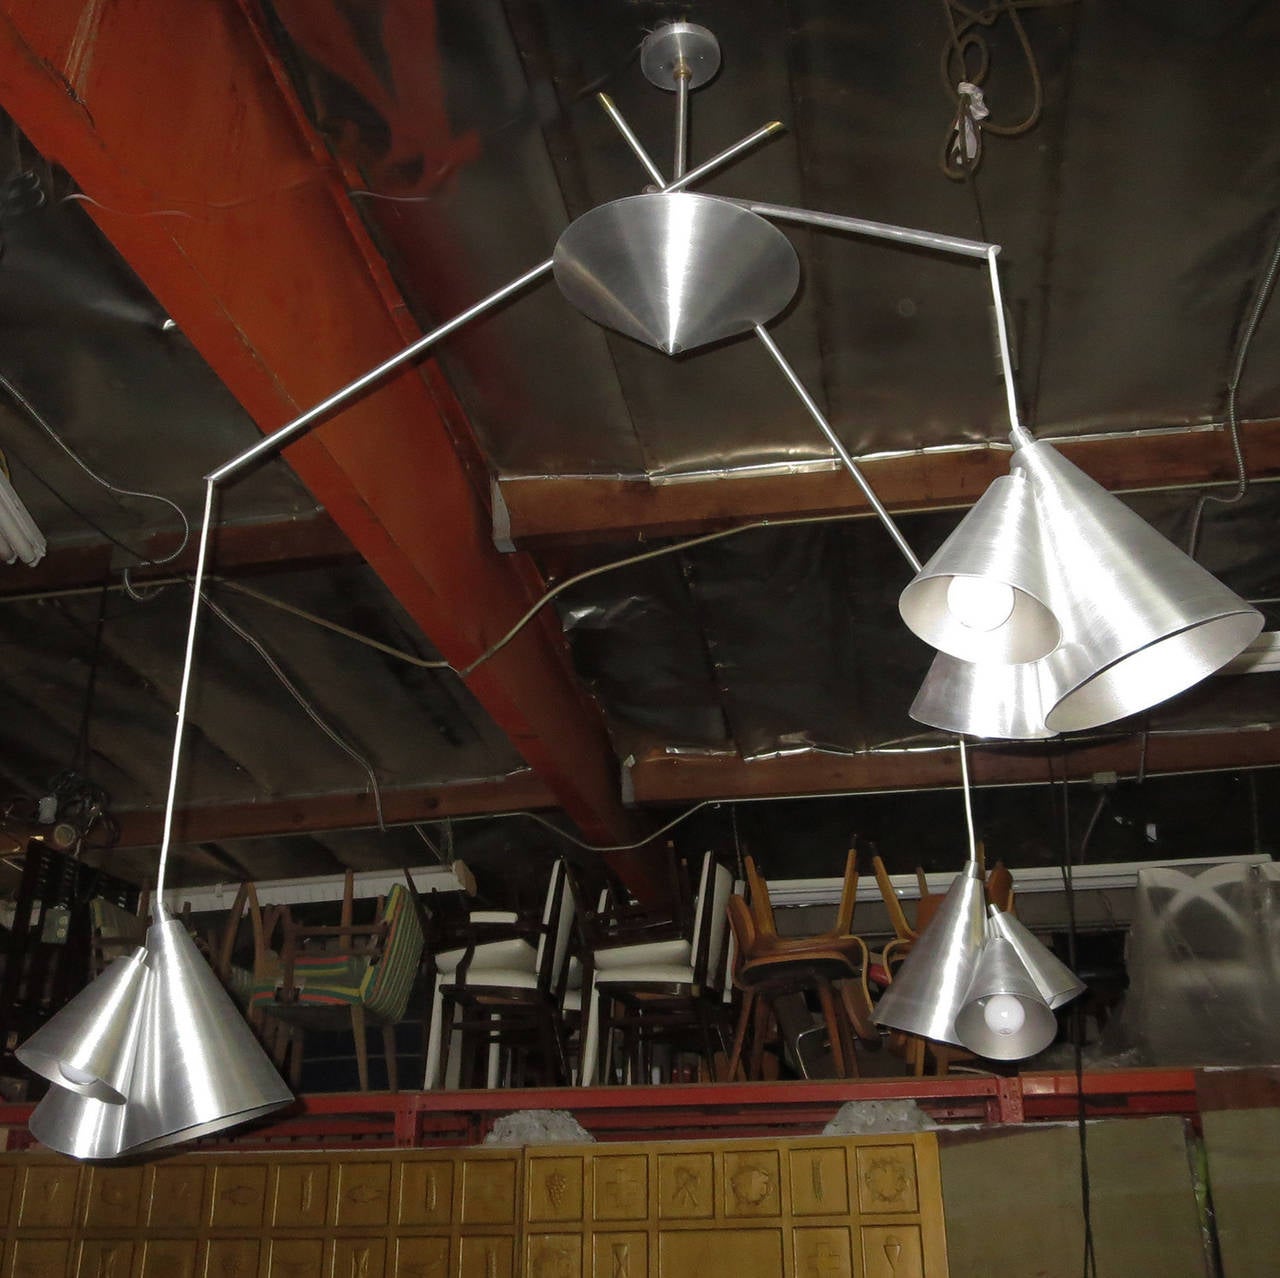 RETIREMENT SALE!!!  EVERYTHING MUST GO - CHECK OUT OUR OTHER ITEMS.				

A fantastic fixture by an unknown designer! The lamp mounts from a central pole, and feeds down into a central cone of brushed aluminum. Three arms intersect, and flare outward